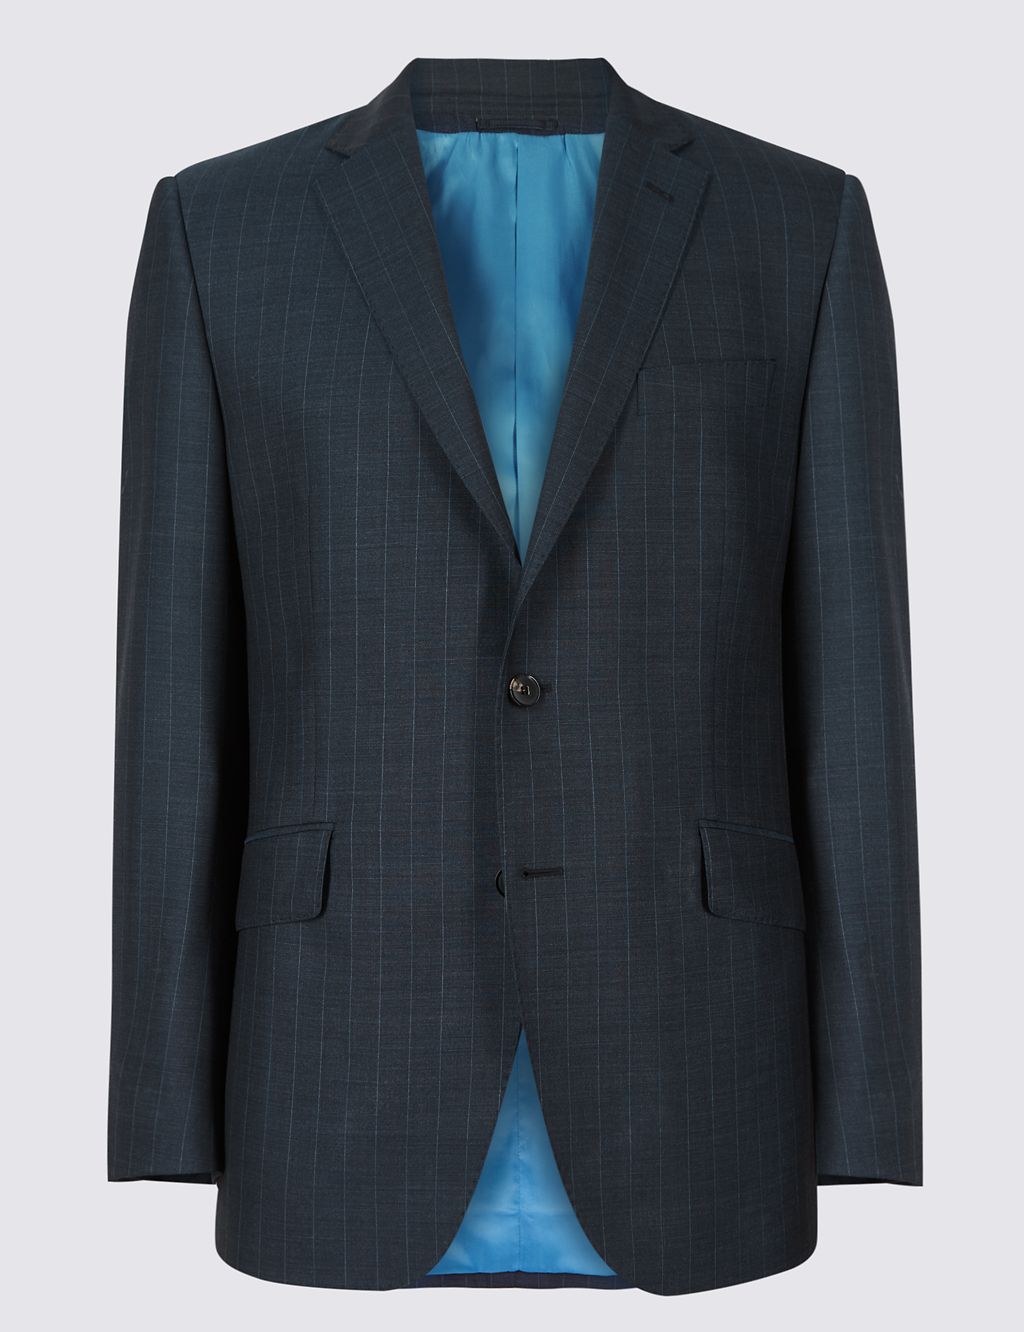 Indigo Striped Tailored Fit Wool Jacket 1 of 8